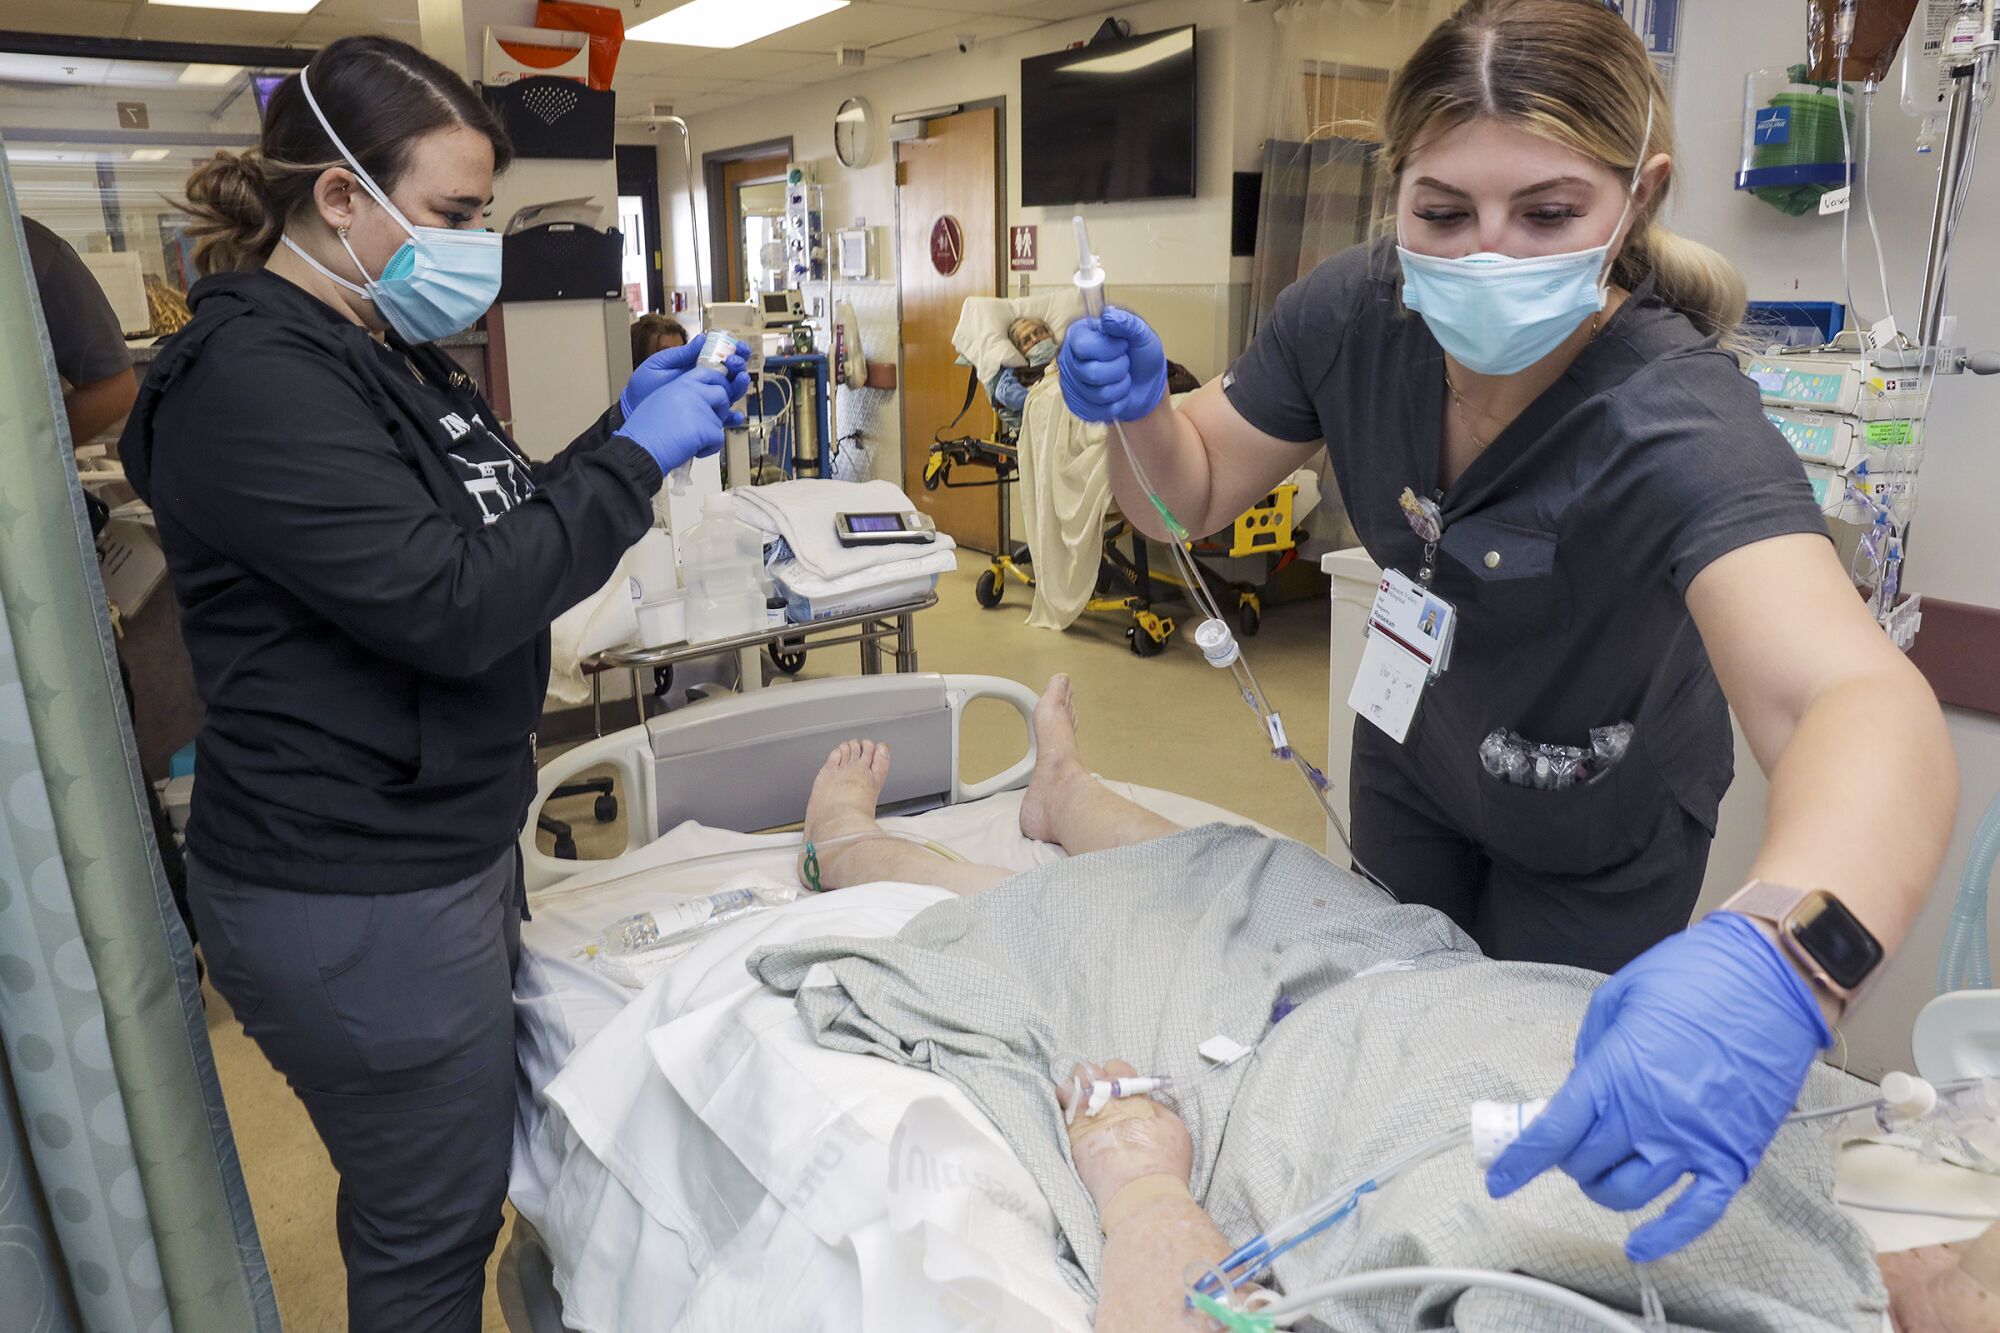 Two nurses attend to a COVID-19 patient